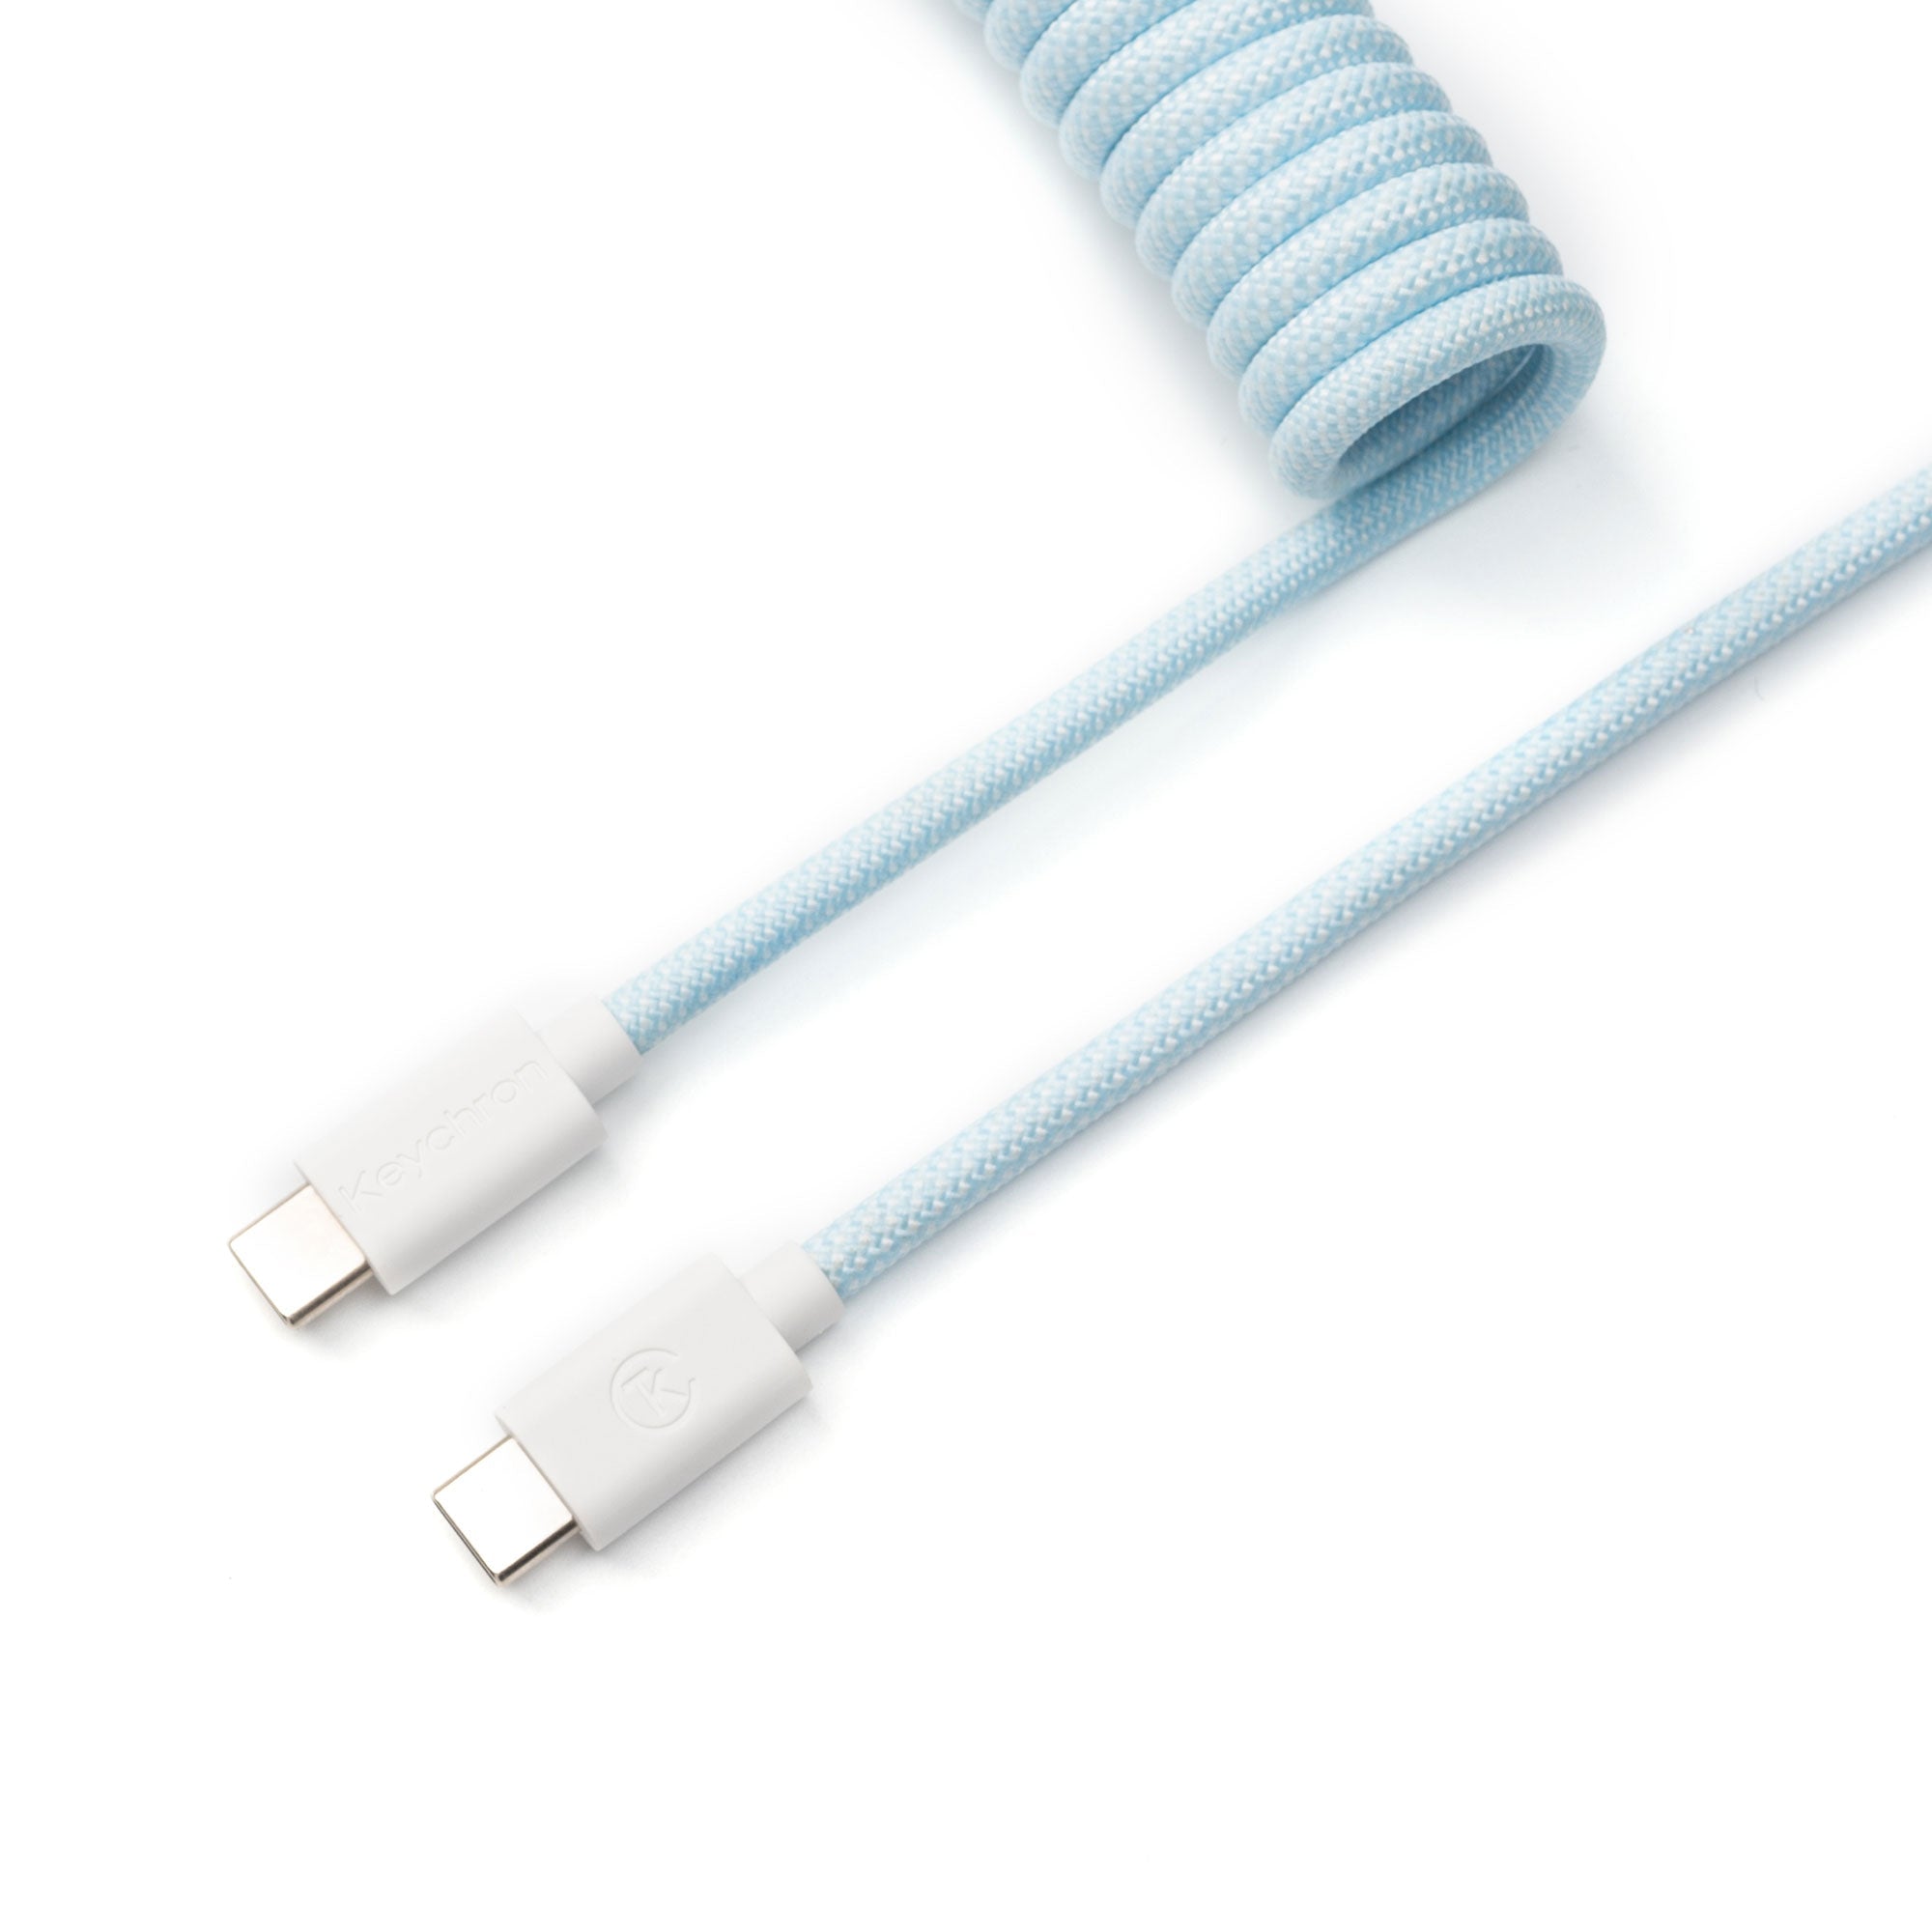 Keychron custom coiled aviator USB type-C cable for keyboards light blue color